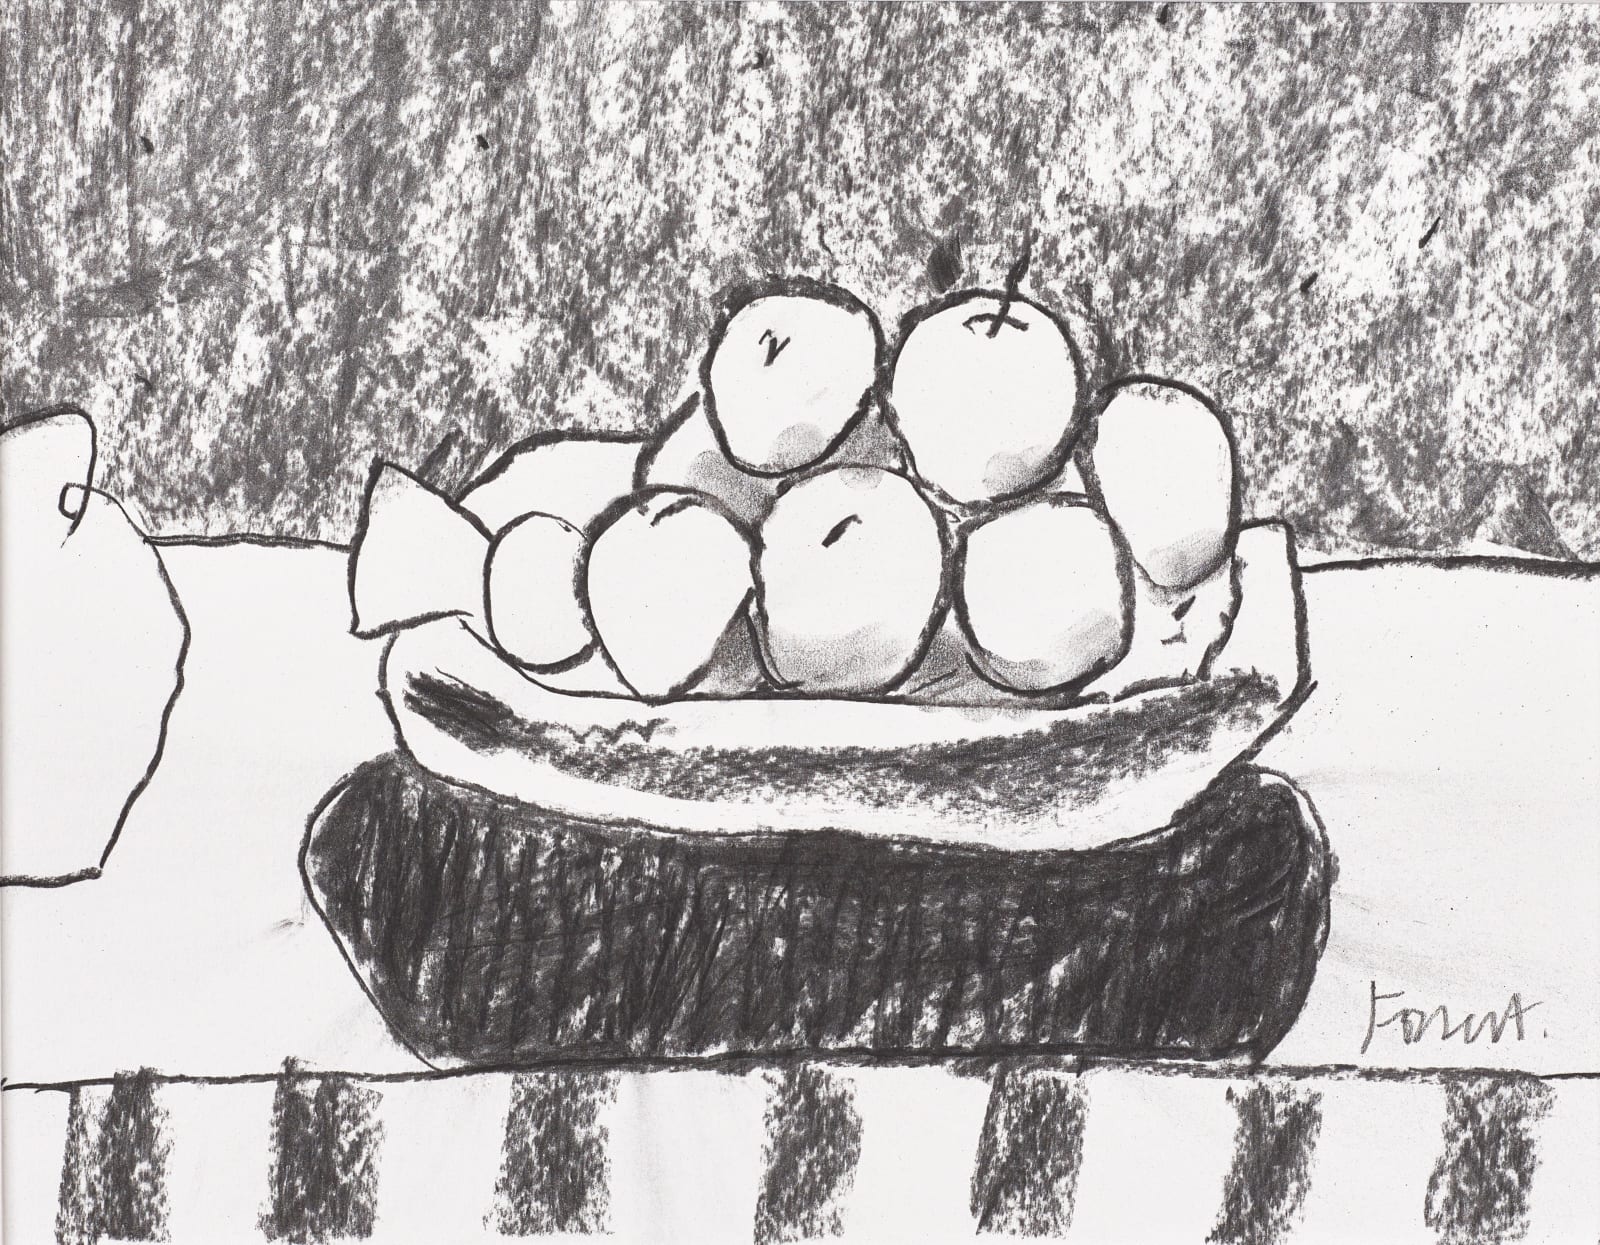 Archie Forrest, Pile of Apples, 2022